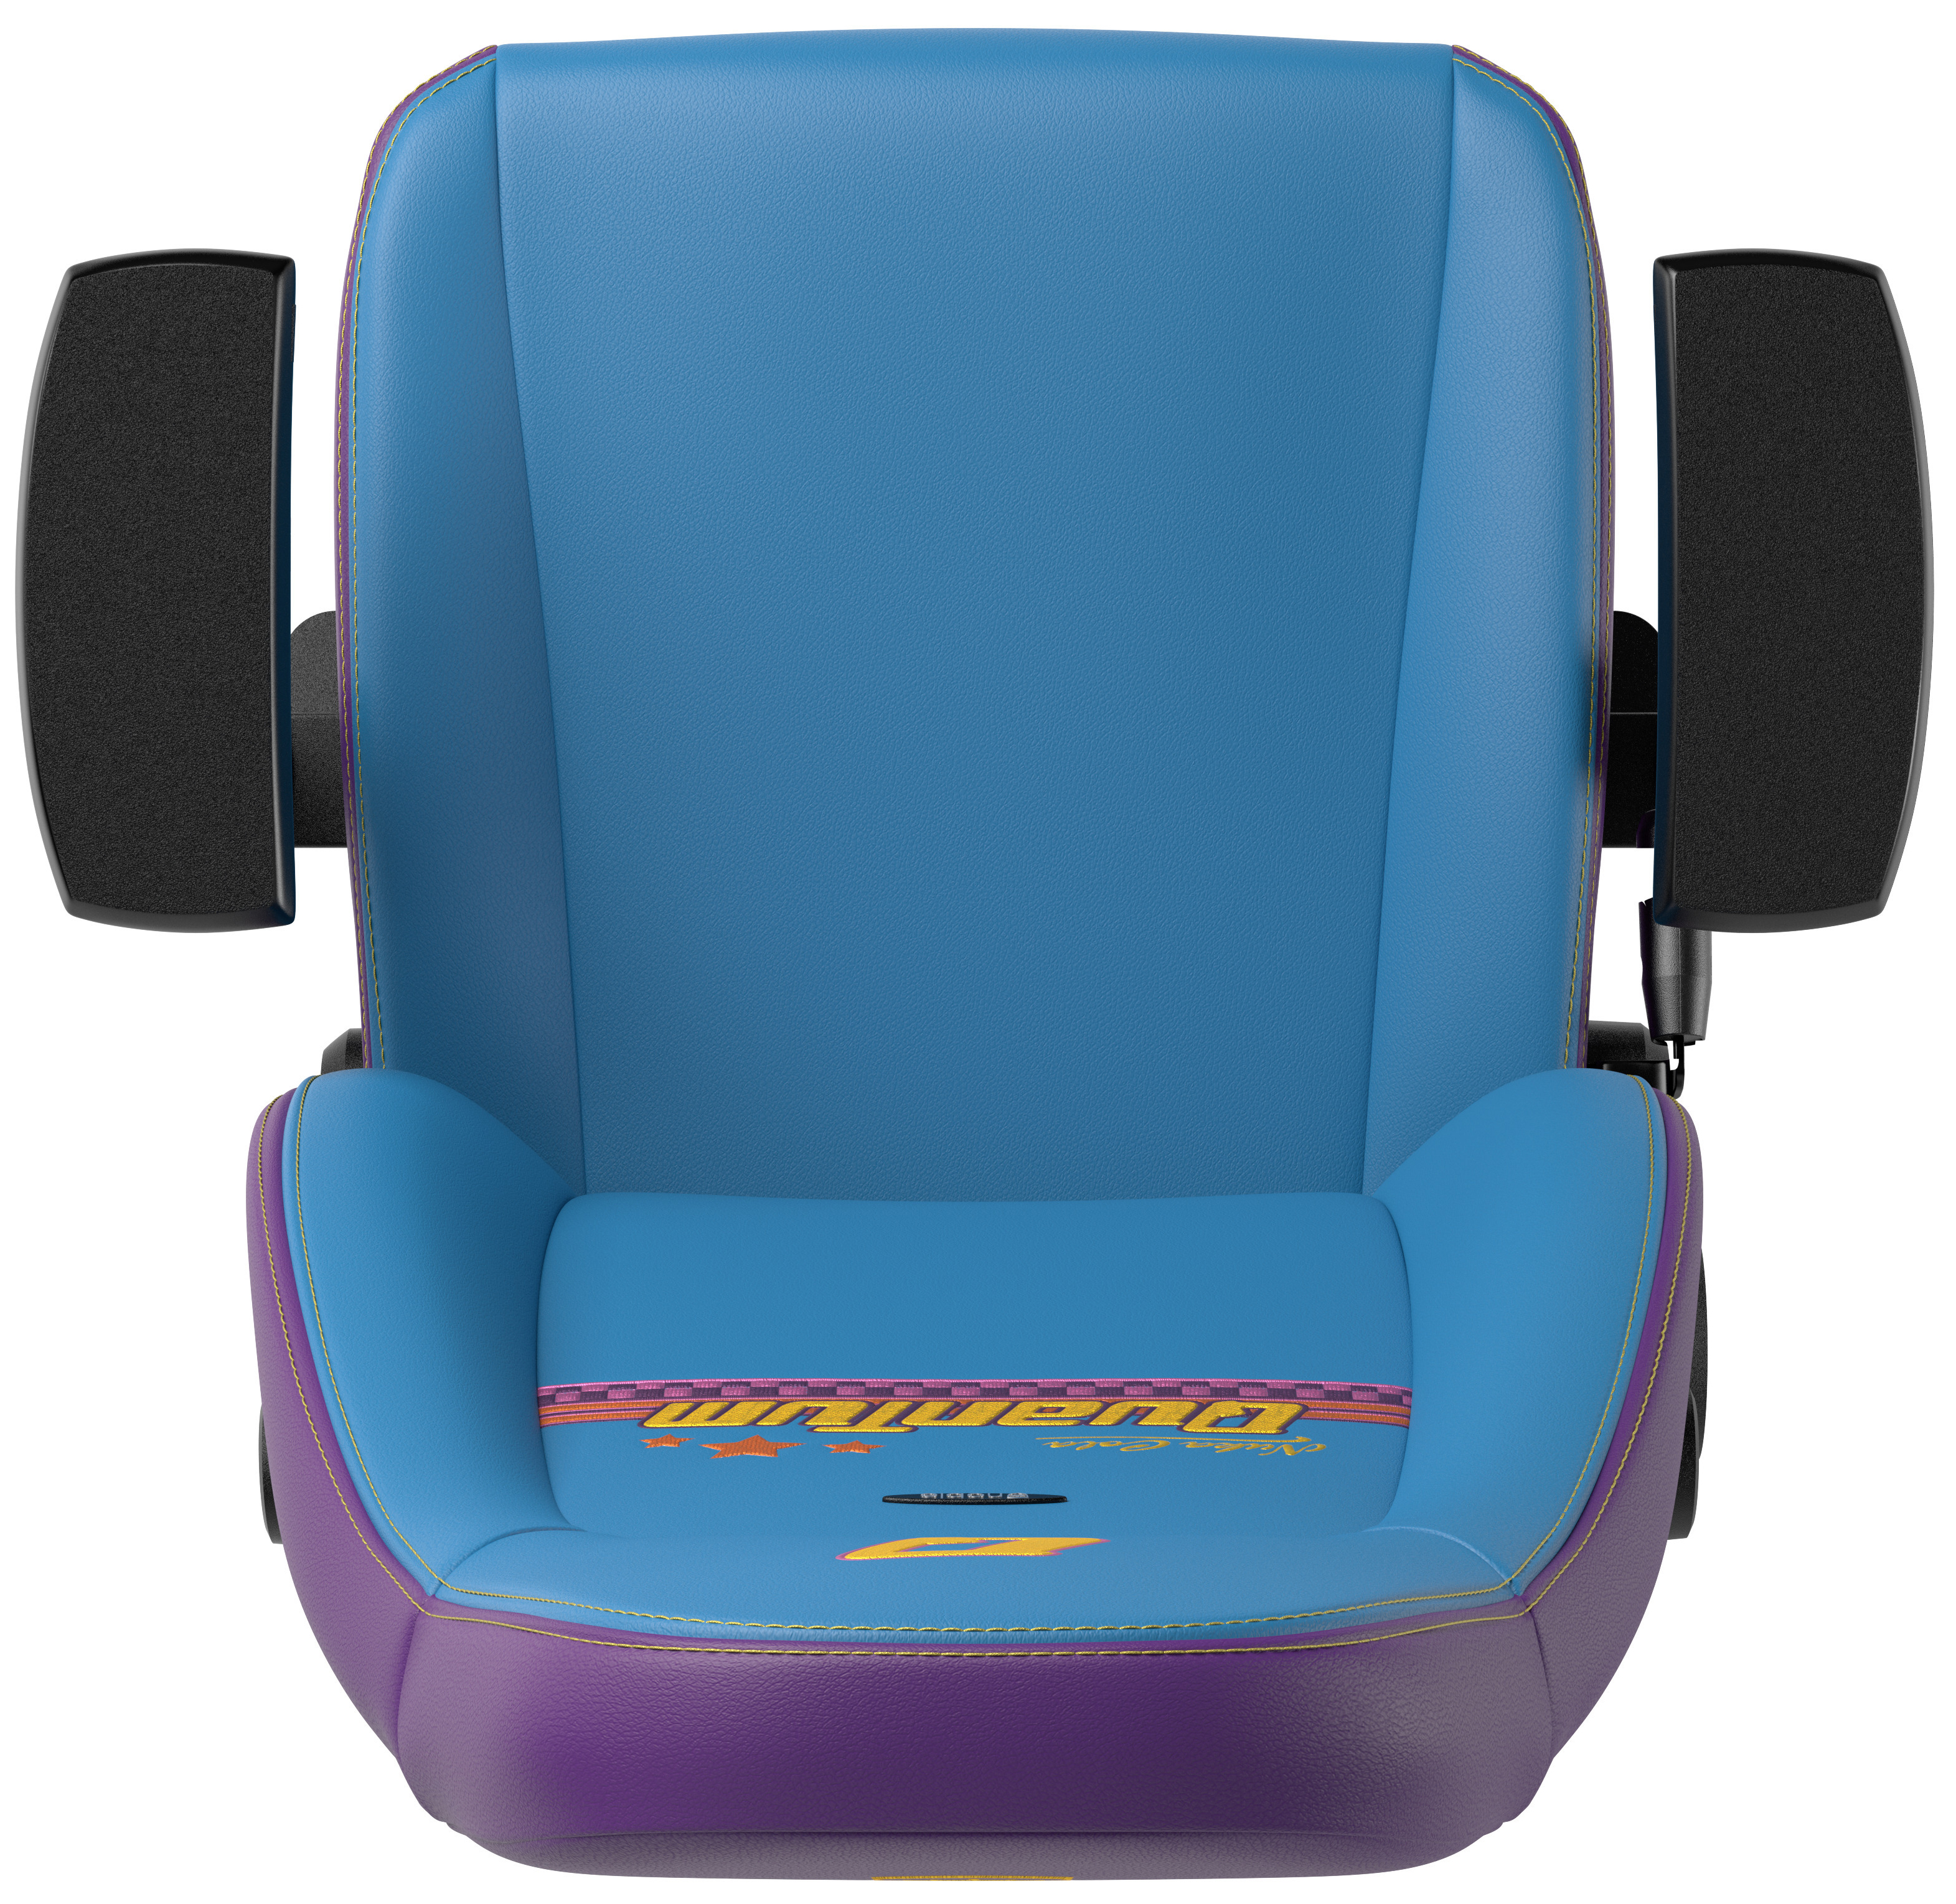 noblechairs - Cadeira noblechairs ICON - Fallout Nuka-Cola Quantum Edition